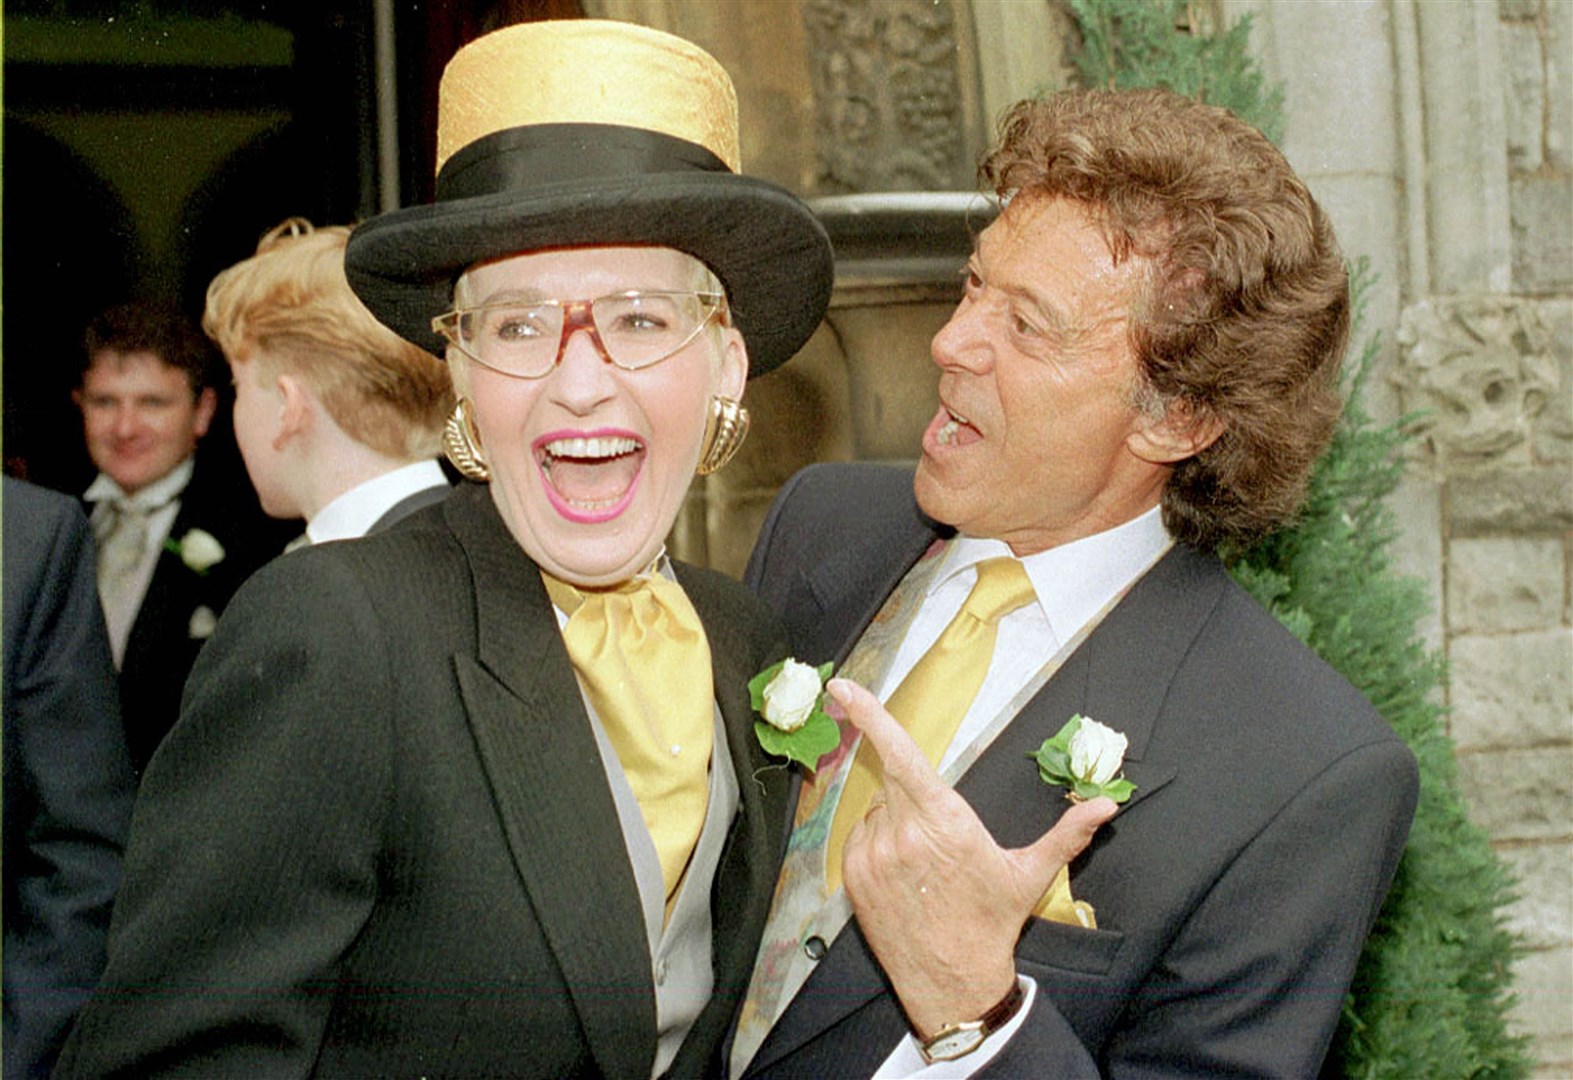 Lionel Blair with Su Pollard at the wedding Les Dennis and Amanda Holden in Bournemouth in 1995 (Tim Ockenden/PA)